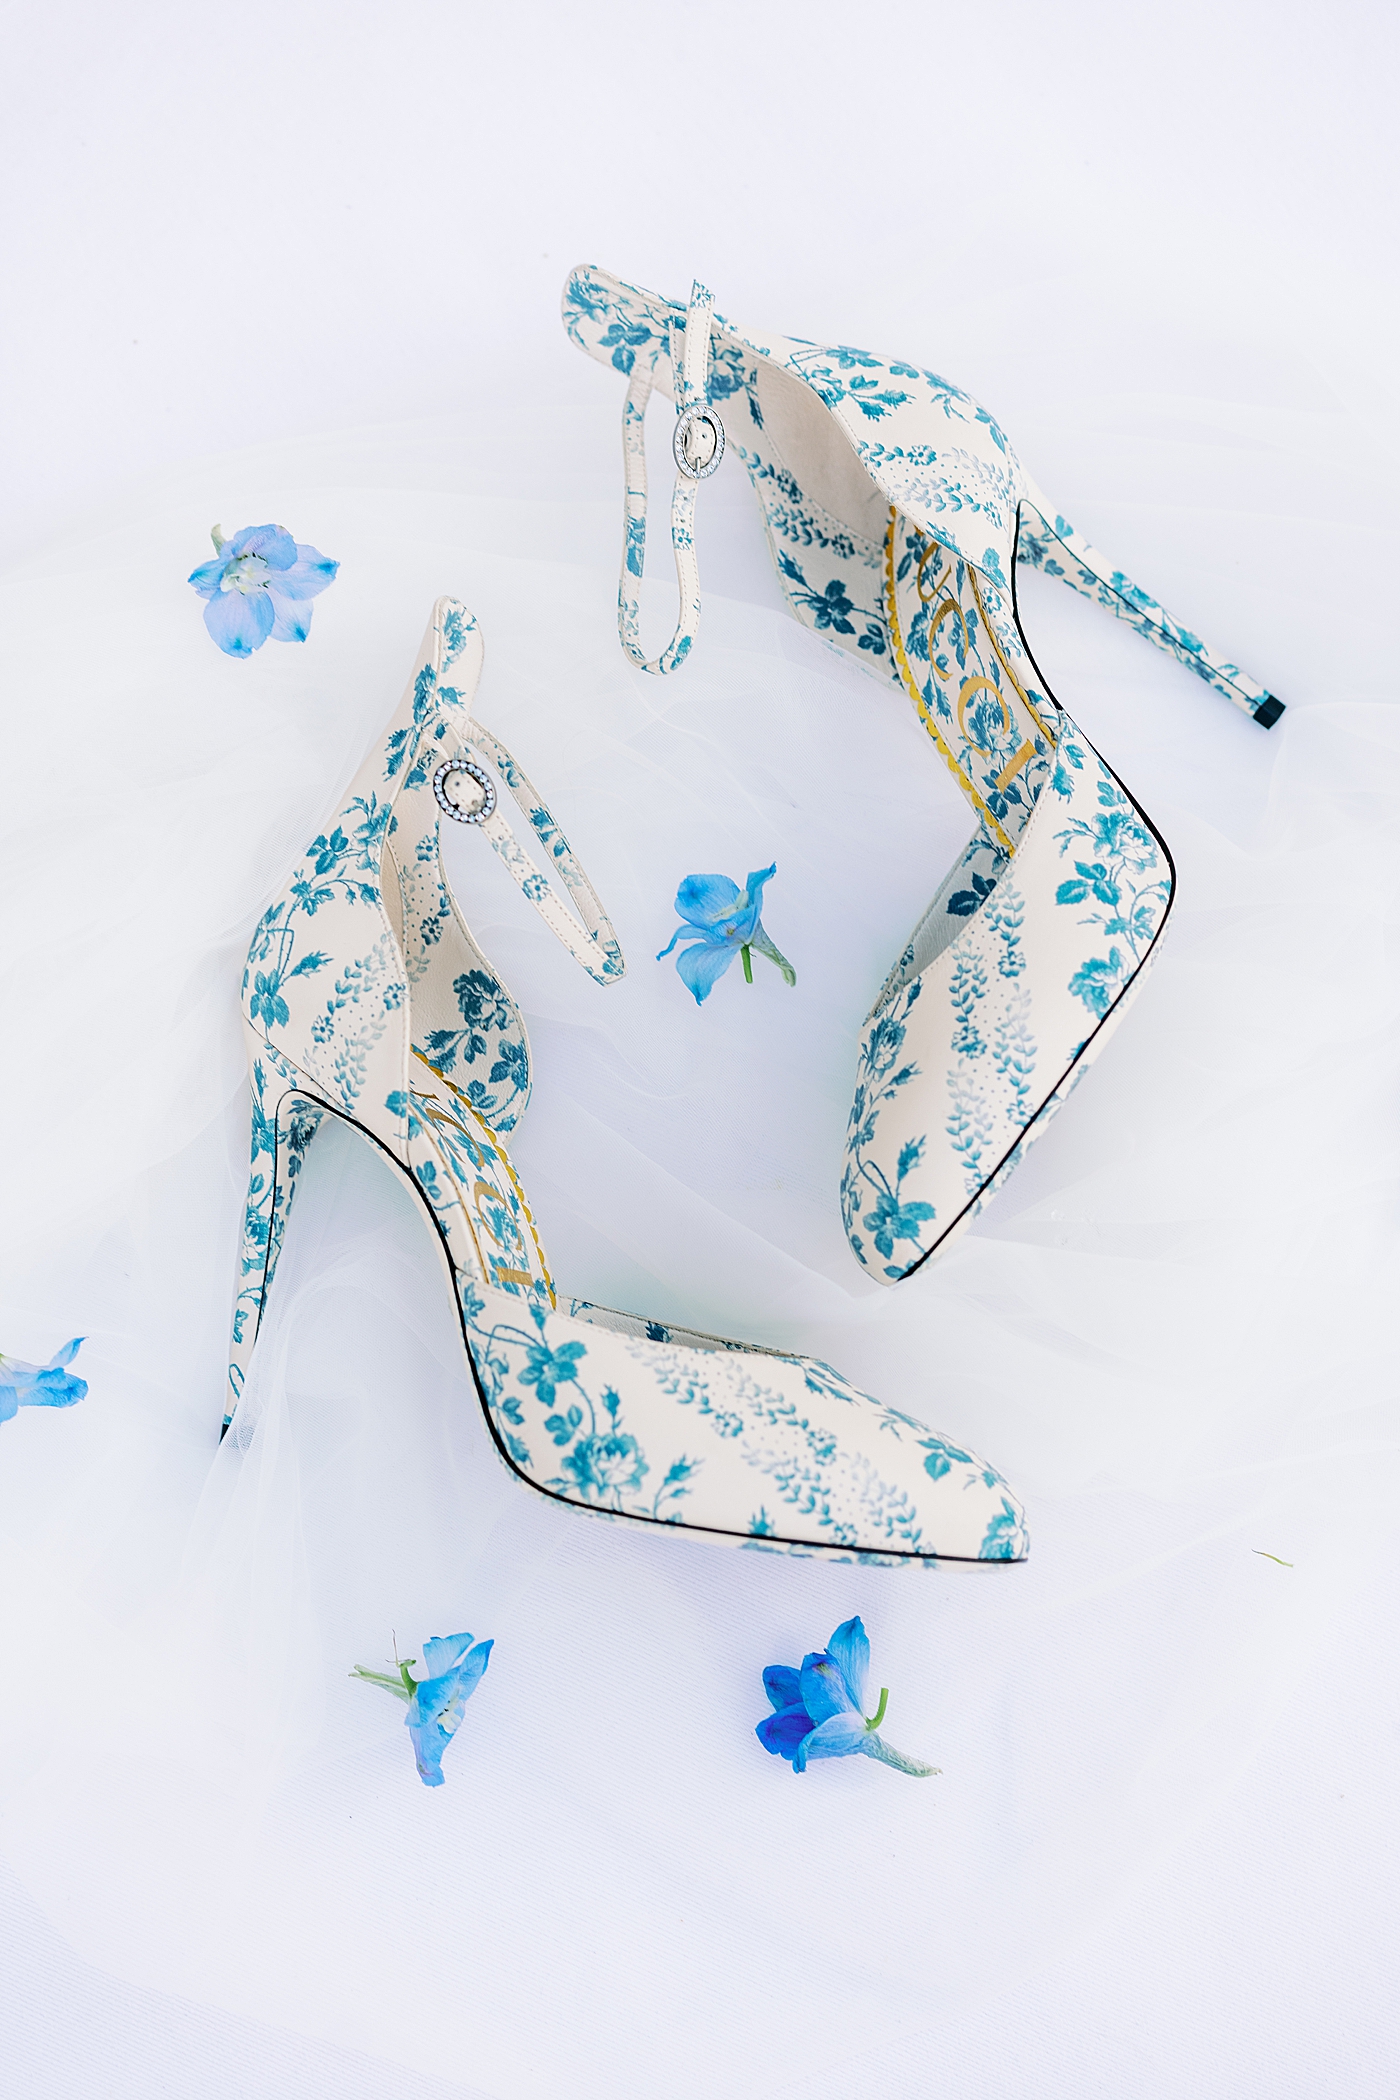 Gucci floral print blue and white heels from summer inspired garden wedding | Photo by Annie Laura Photo